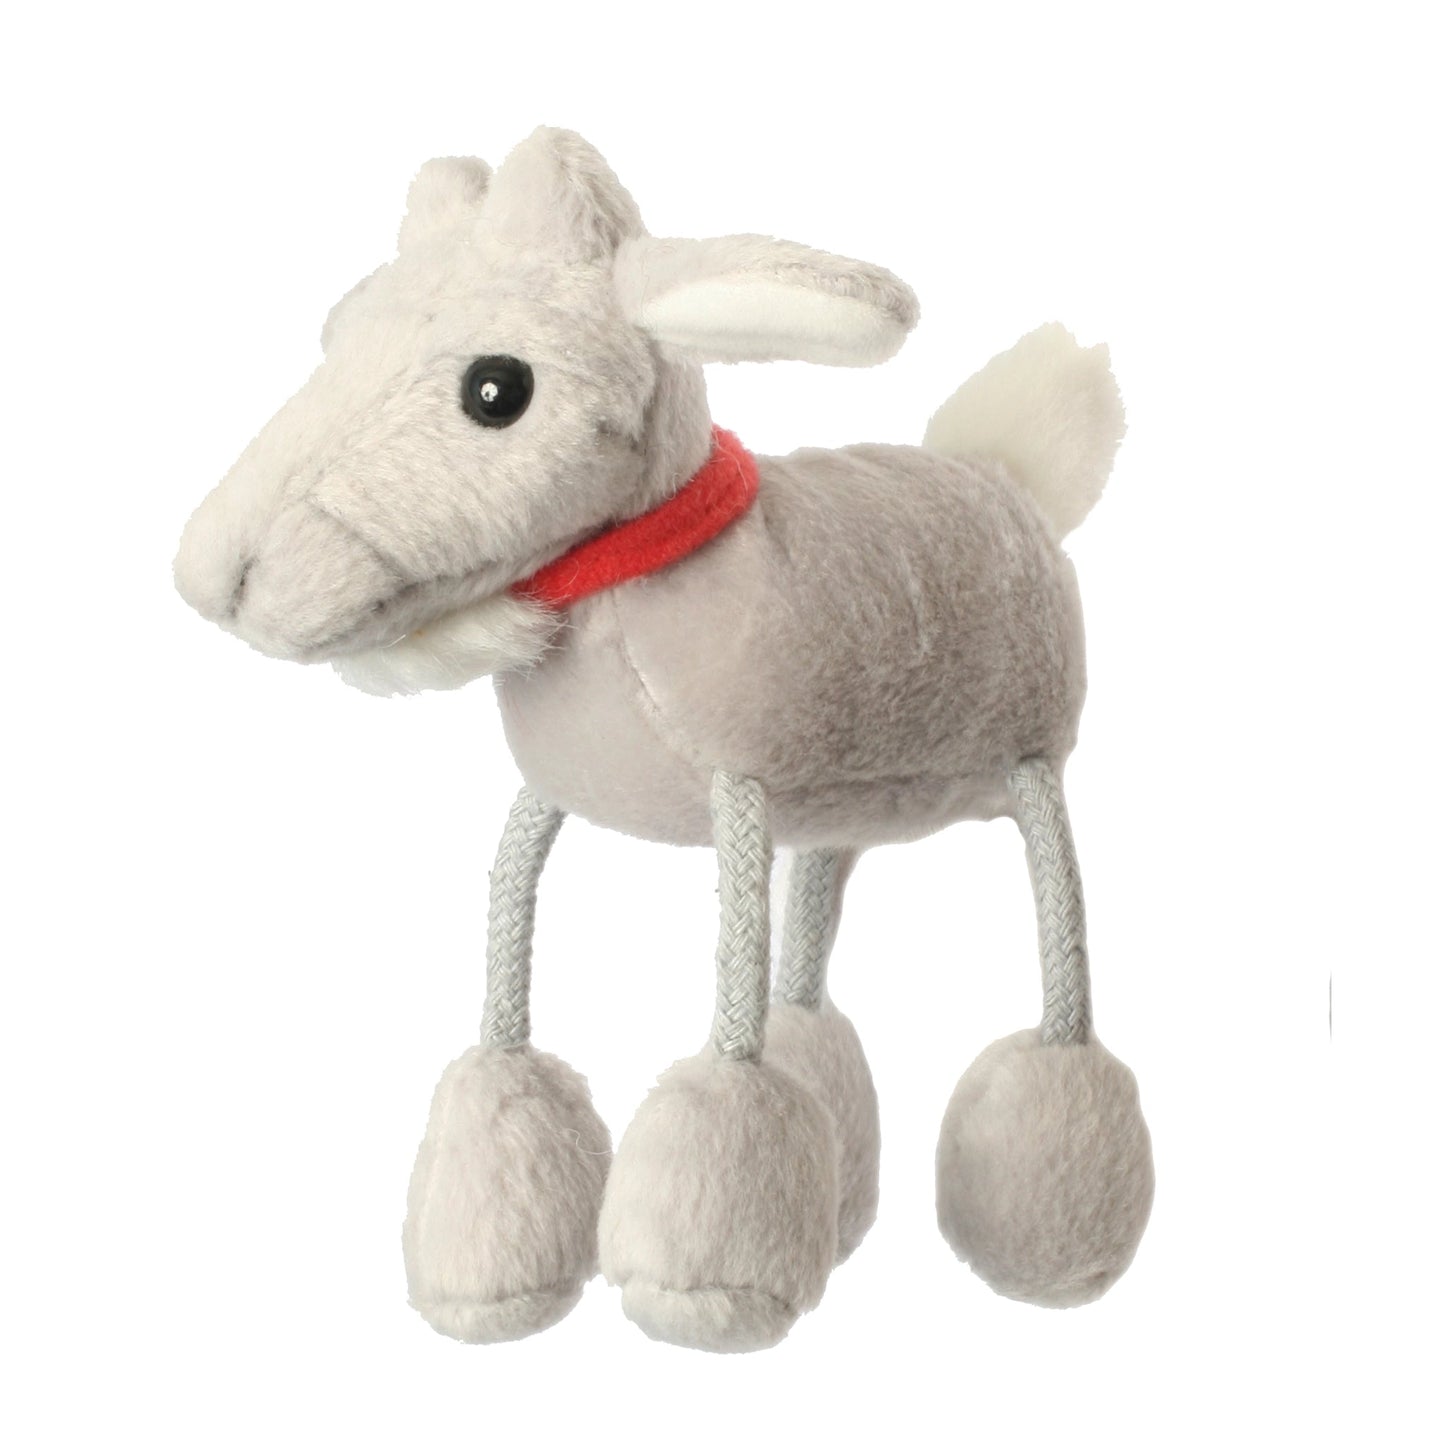 Goat Finger Puppet - The Puppet Company - The Forgotten Toy Shop